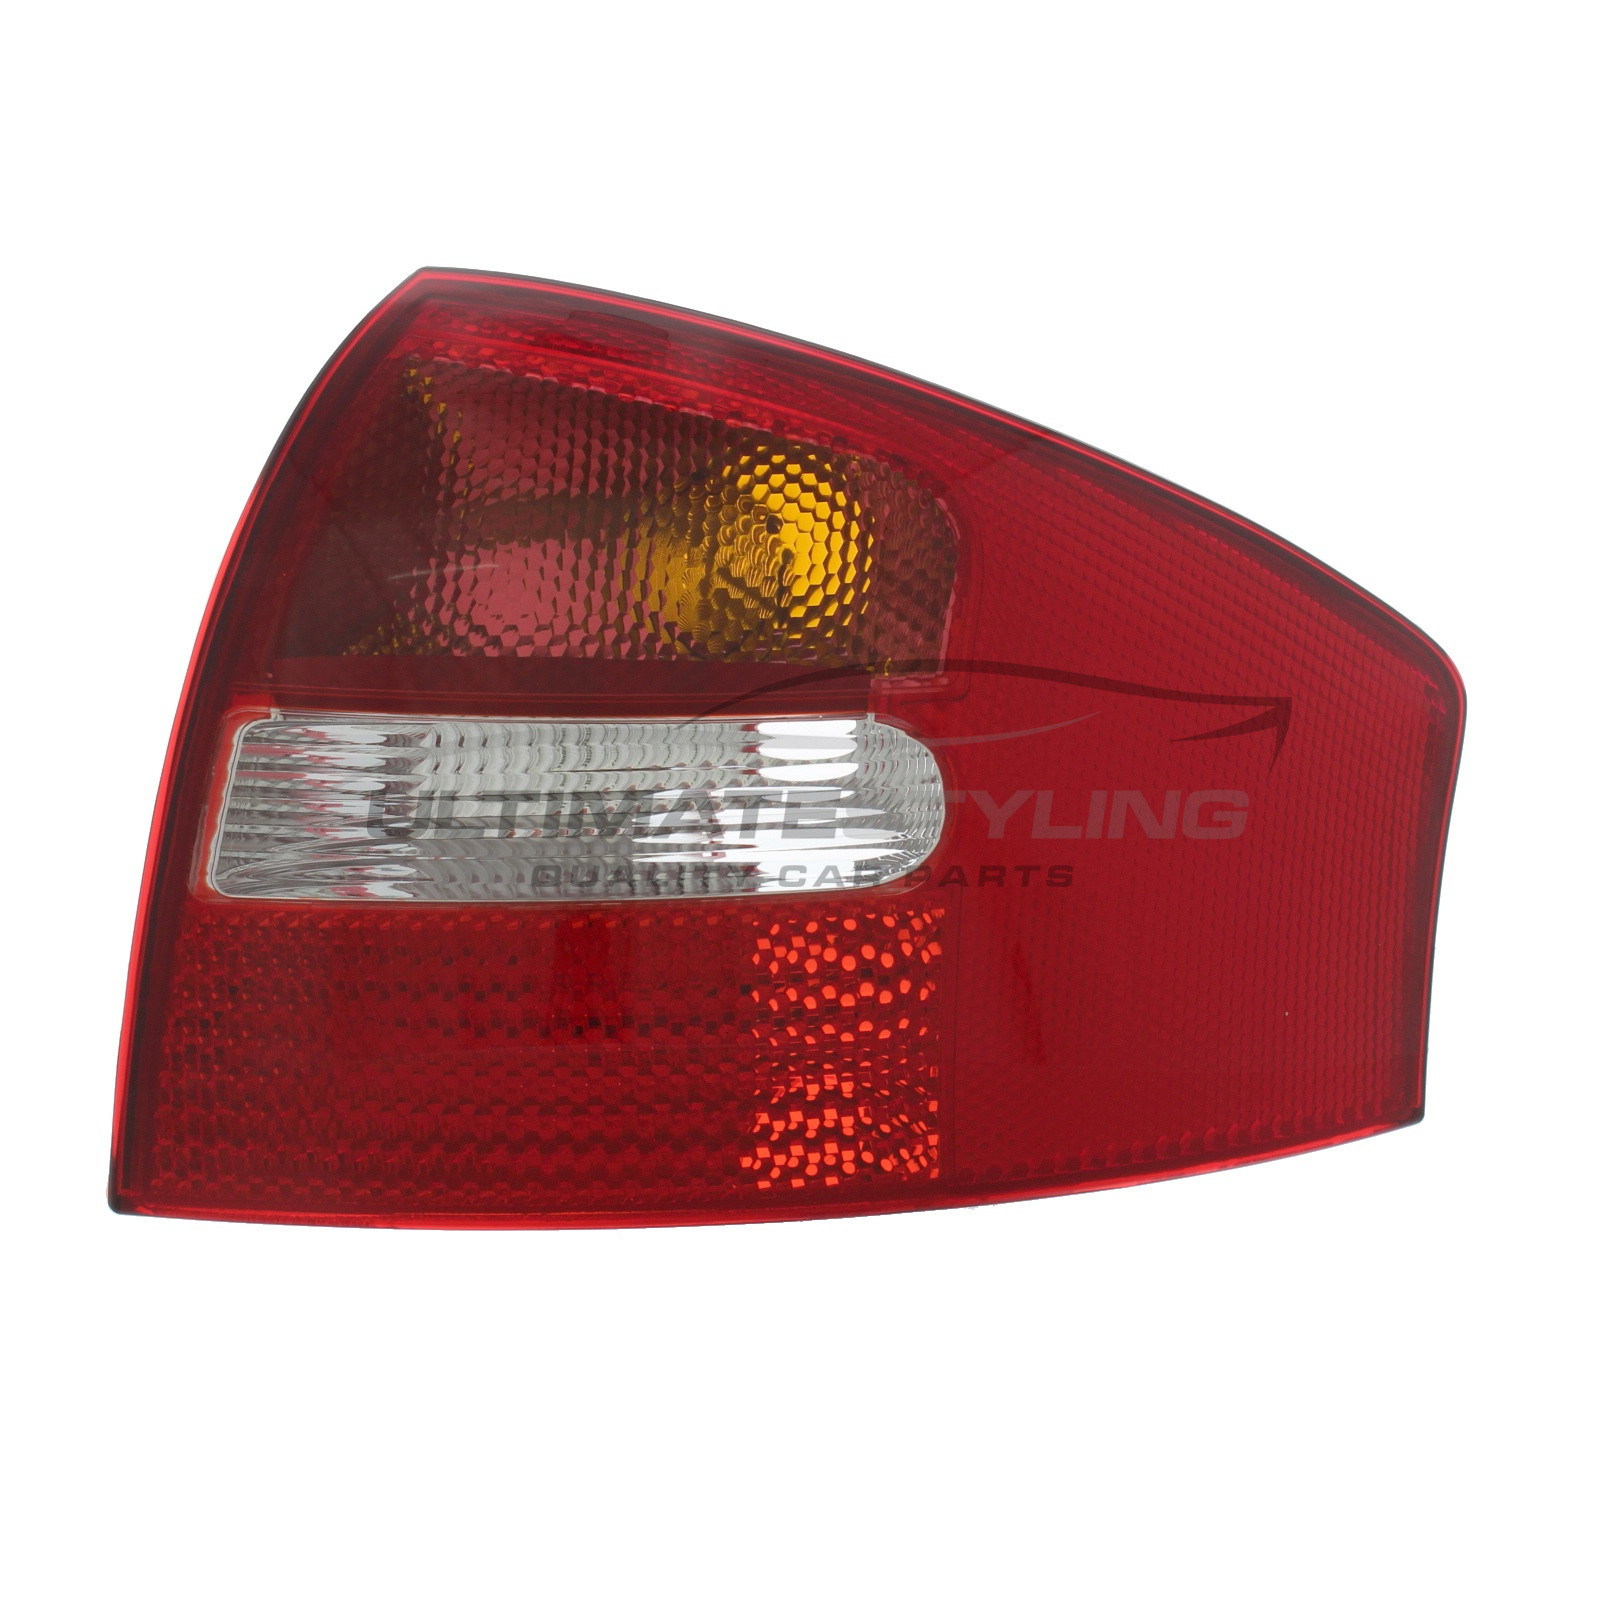 Audi A6 2001-2004 / Audi RS6 2002-2005 / Audi S6 2001-2004 Non-LED with Pink Tinted Indicator Rear Light / Tail Light Excluding Bulb Holder Drivers Side (RH)